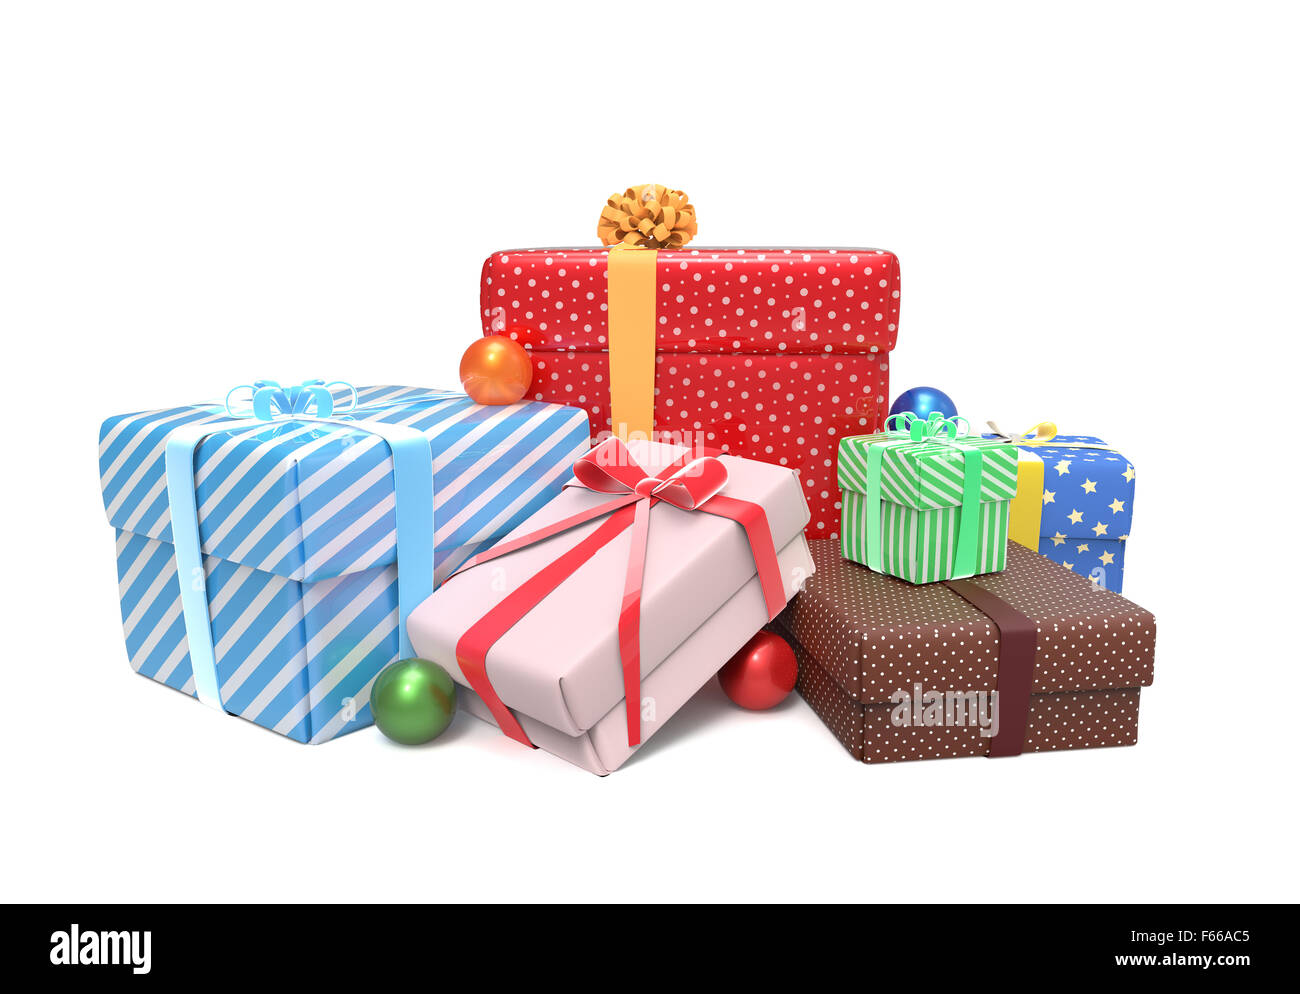 Pile of cute gift boxes vector illustration. Lots of wrapped